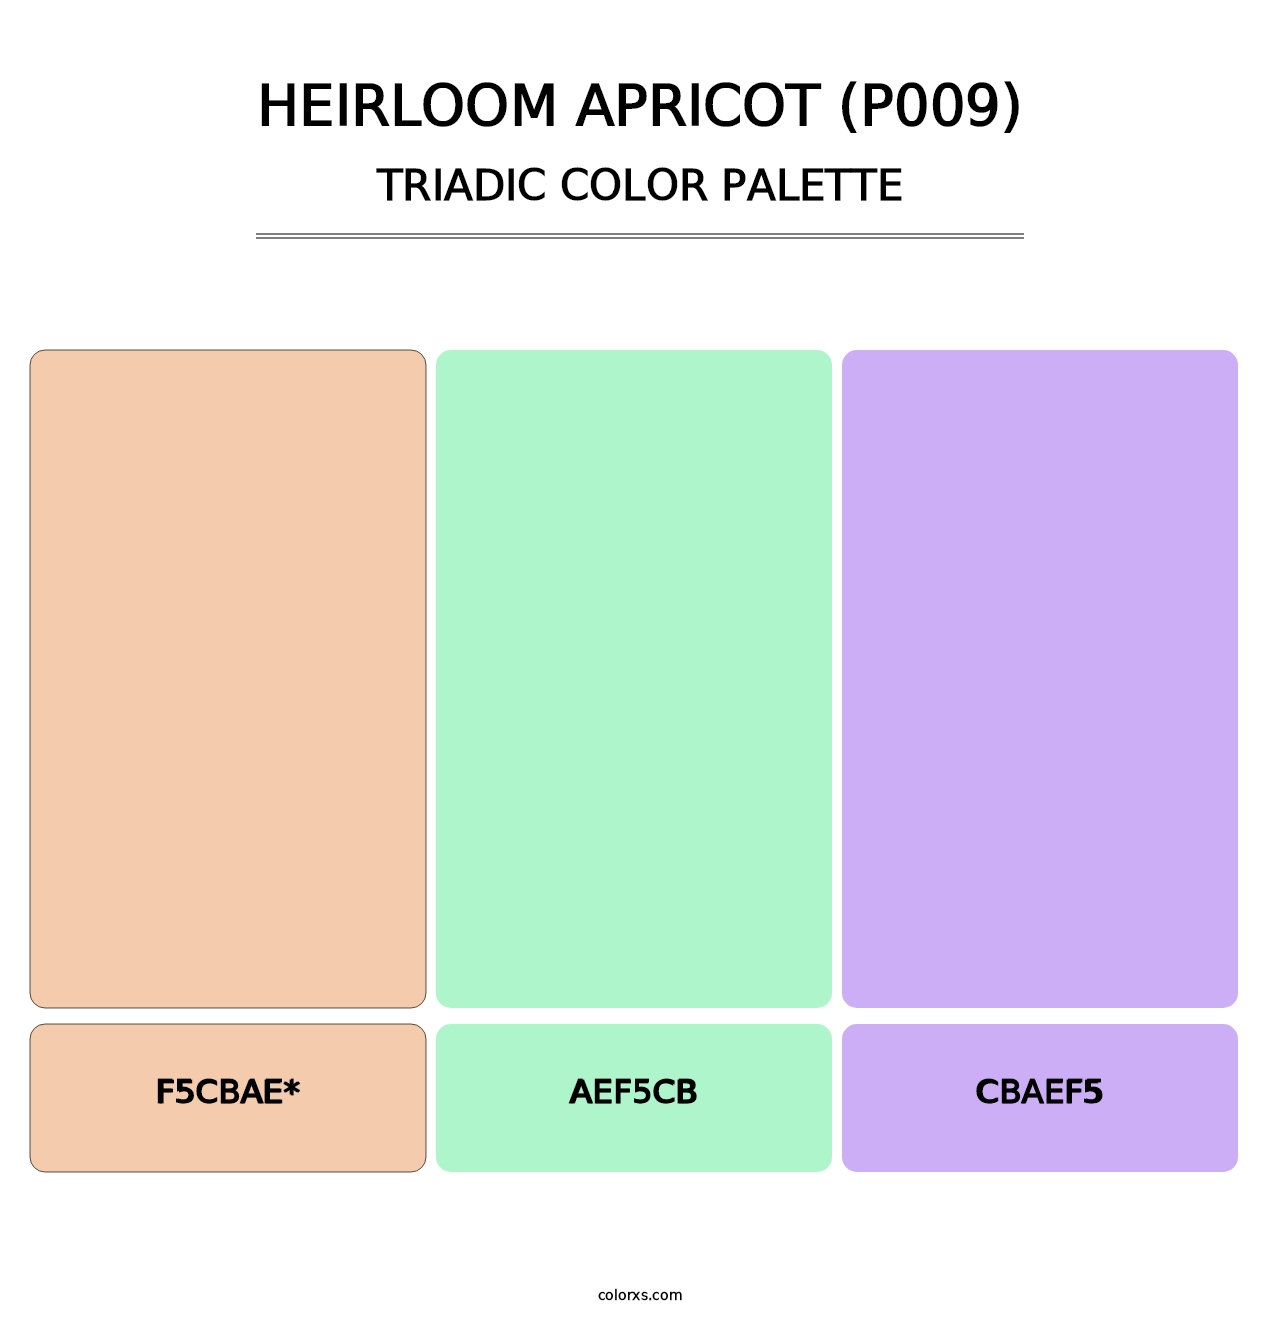 Heirloom Apricot (P009) - Triadic Color Palette